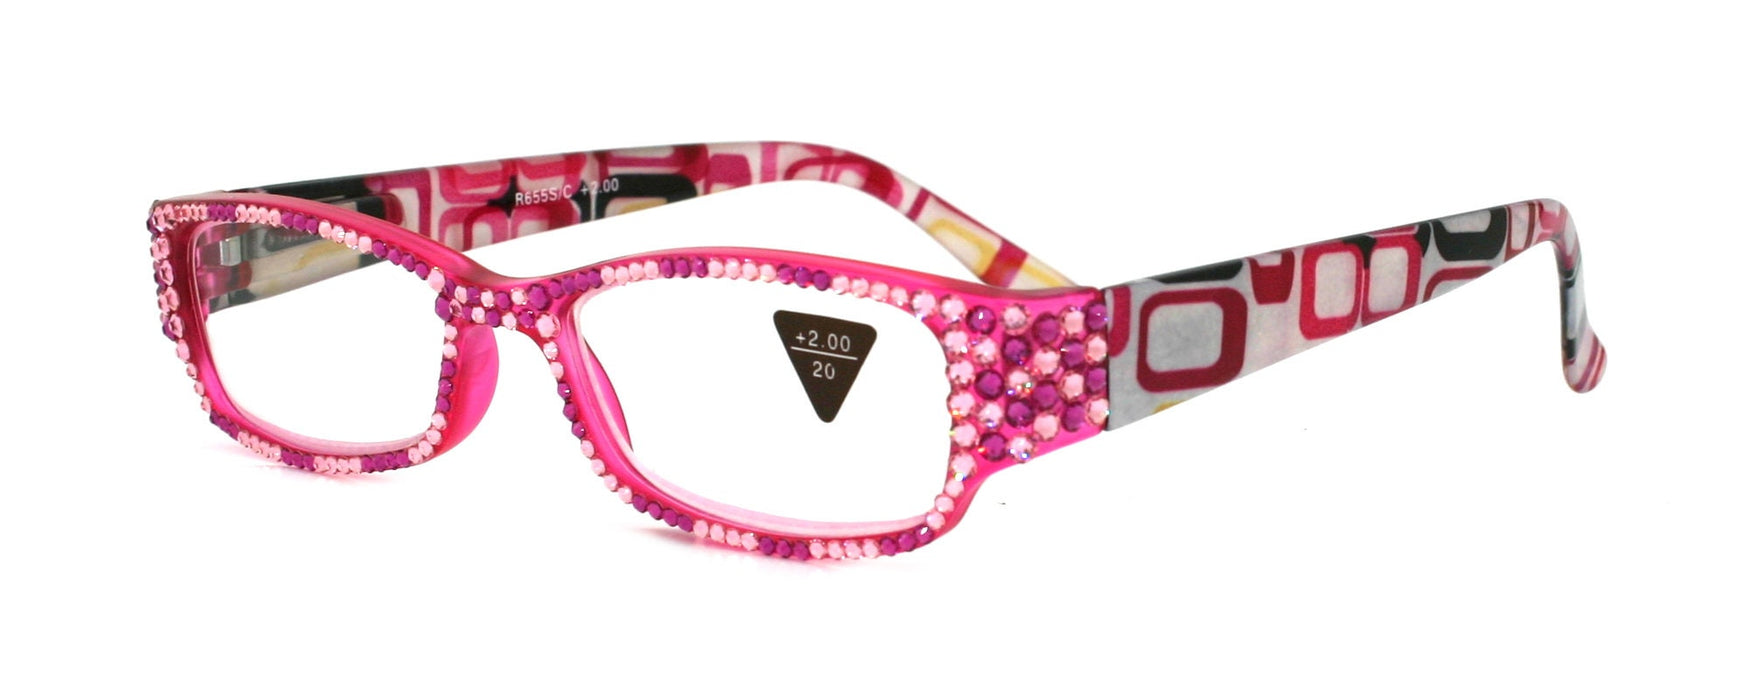 Daisy, (Bling) Reading Glasses for women W (Full Crystals) (Pink, Clear) +1..+4 (Pink) Rectangular. NY Fifth Avenue